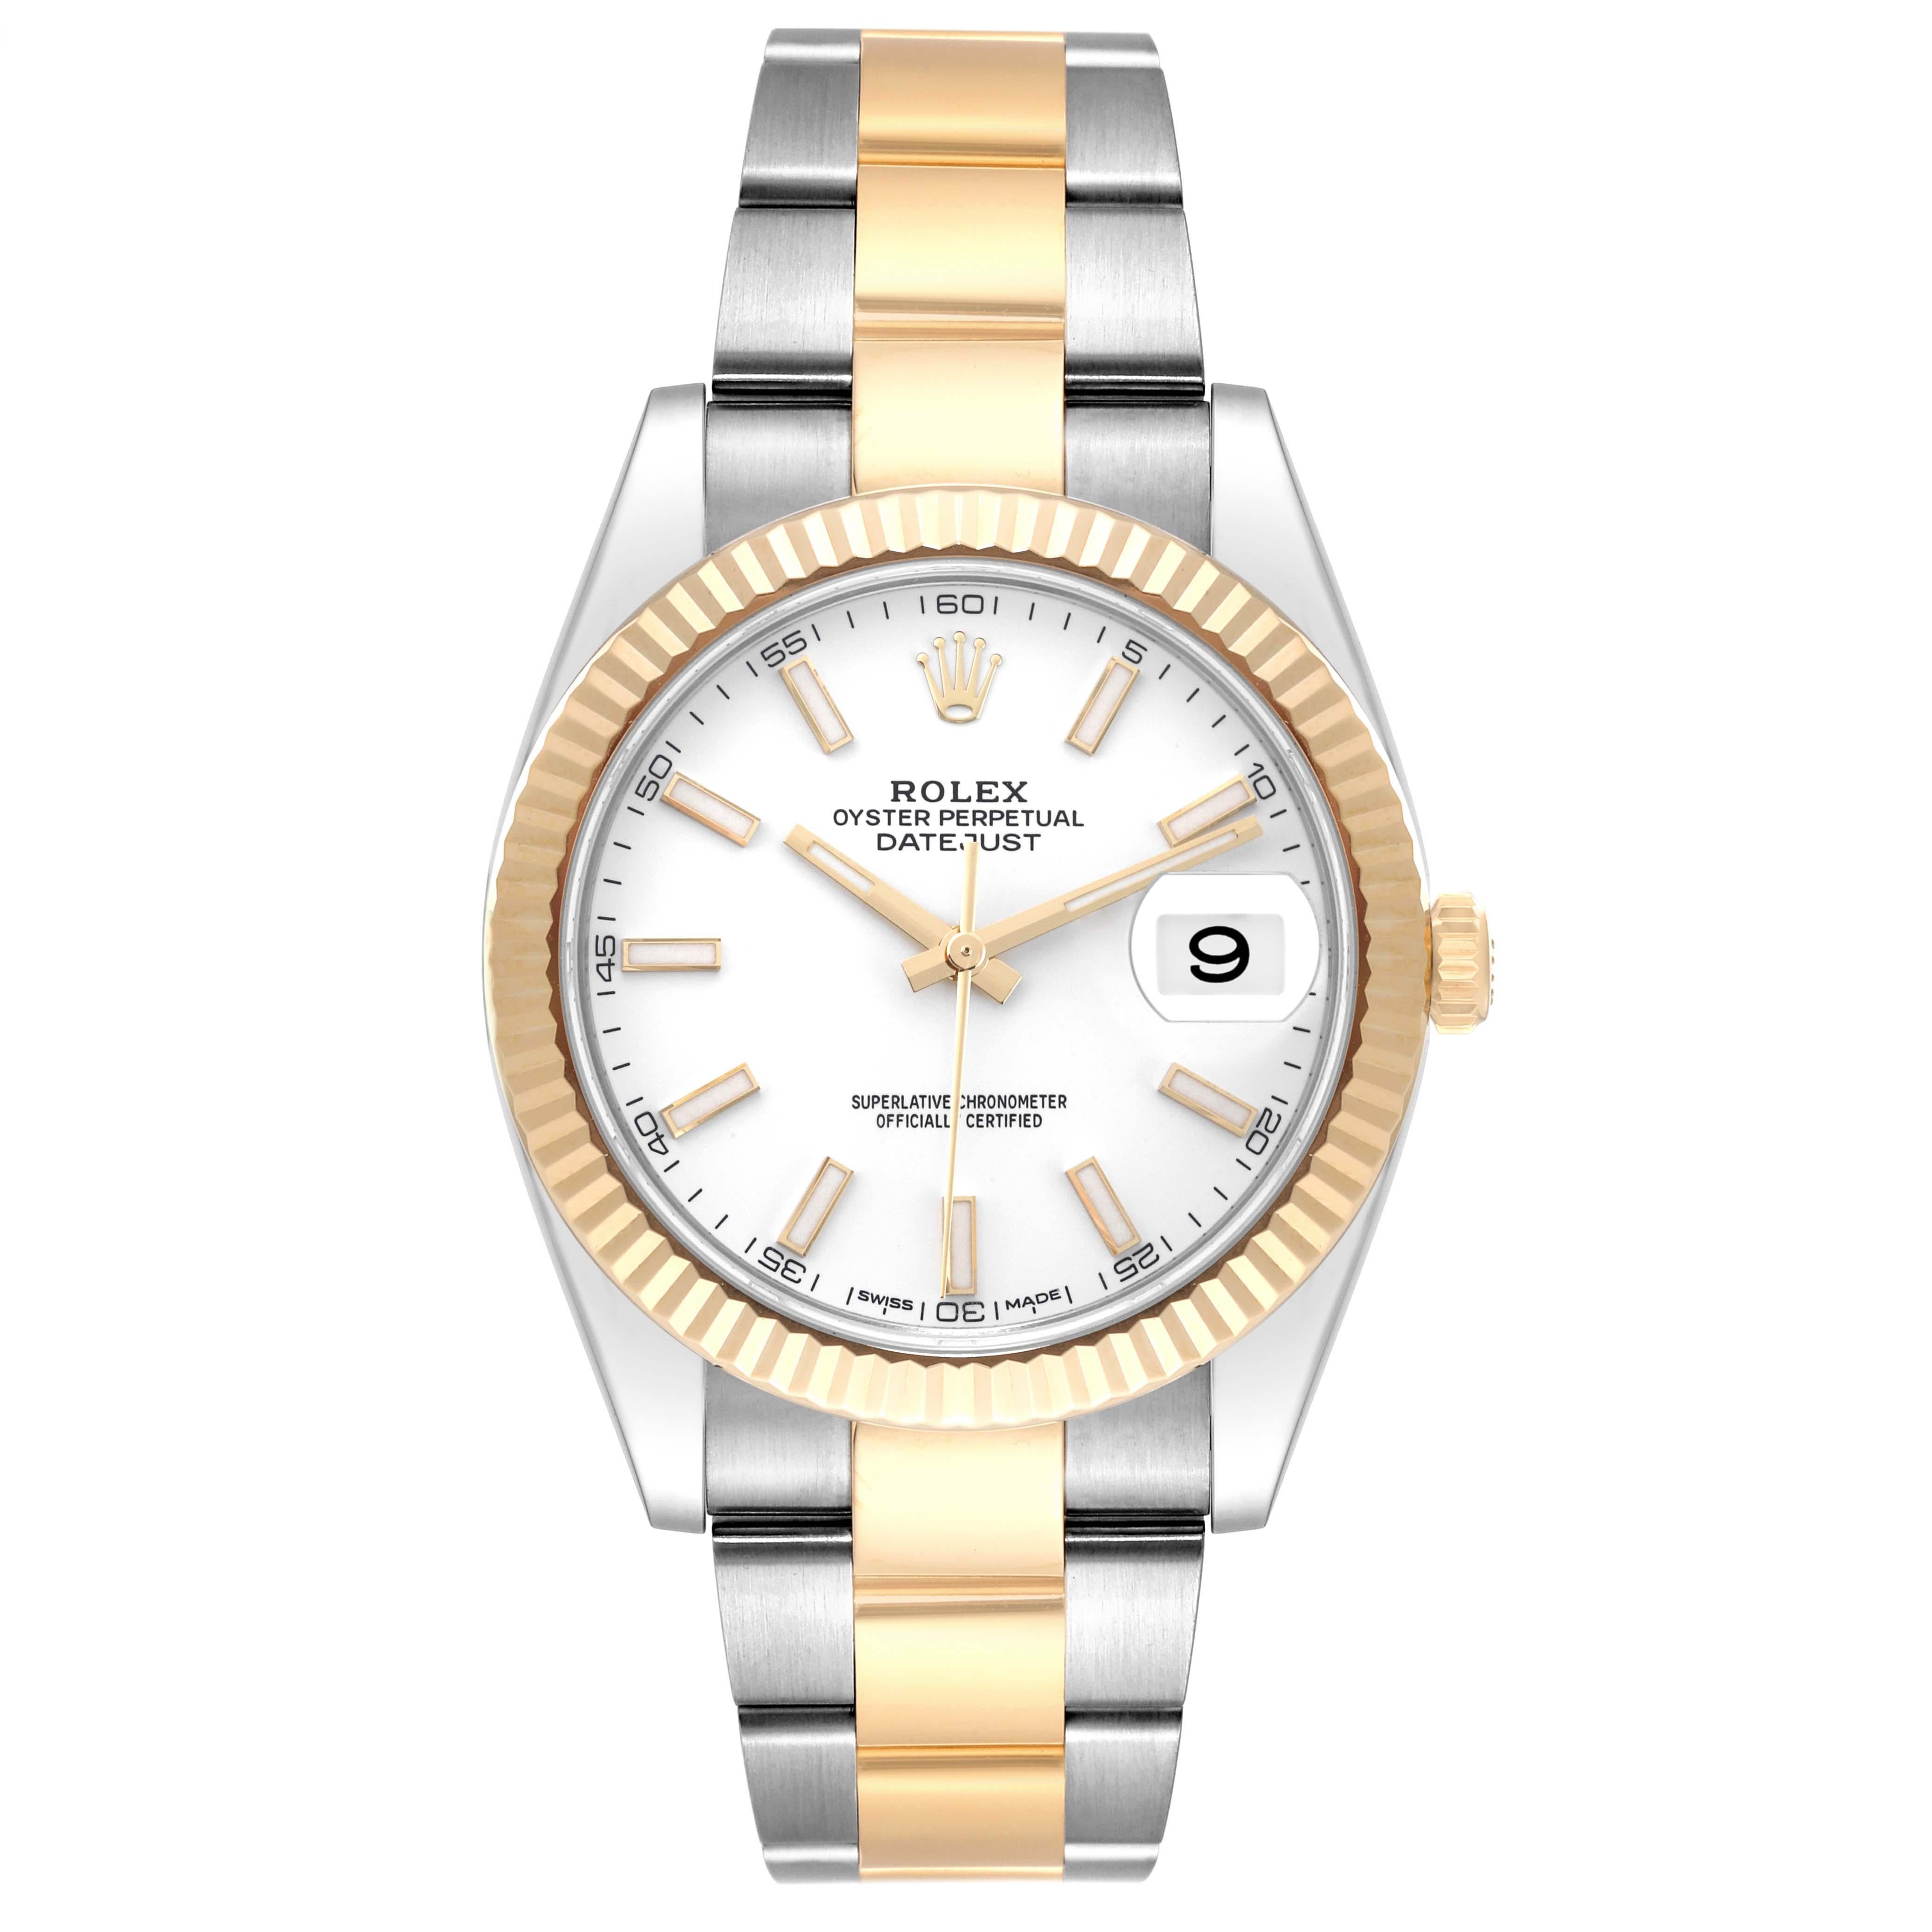 Rolex Datejust 41 Steel Yellow Gold White Dial Mens Watch 126333 Box Card. Officially certified chronometer automatic self-winding movement. Stainless steel and 18K yellow gold case 41.0 mm in diameter.  High polished lugs. Rolex logo on a crown.